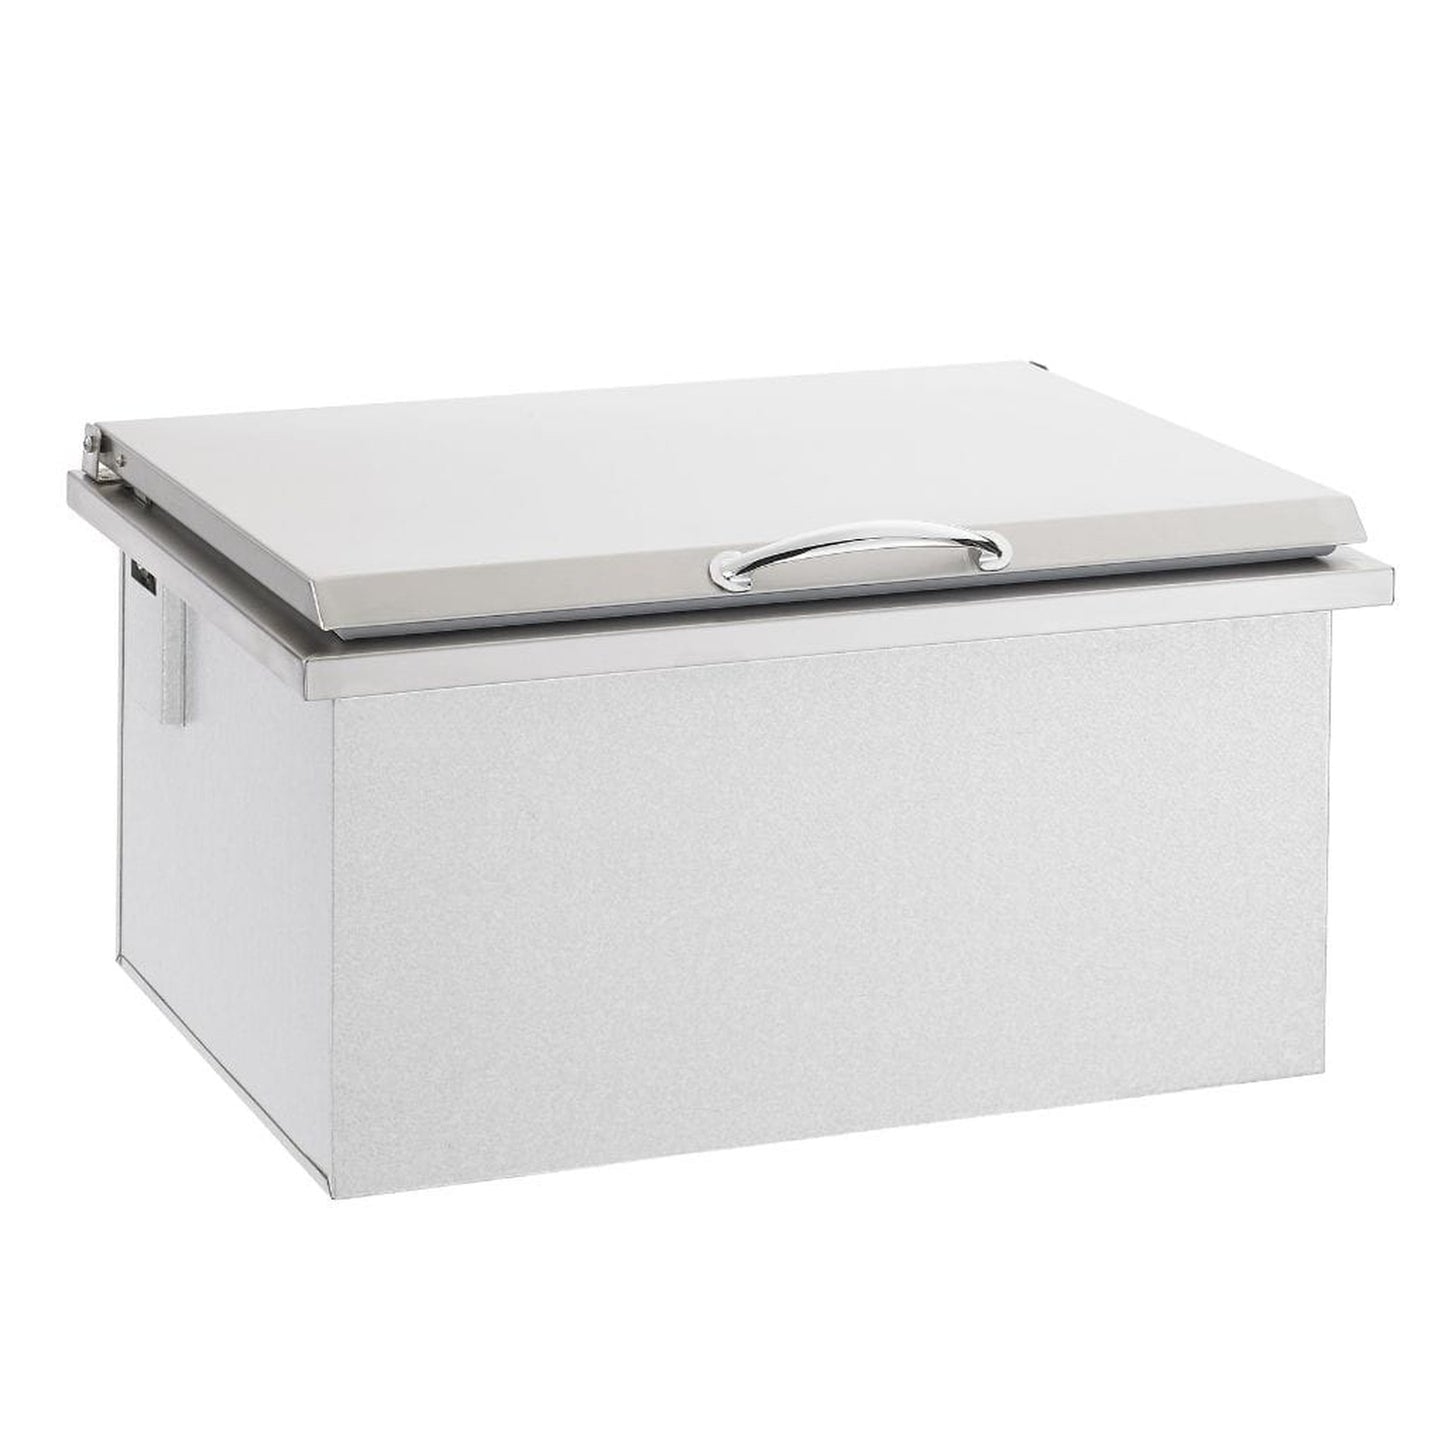 Summerset 28" Stainless Steel Drop-In Ice Chest - Large